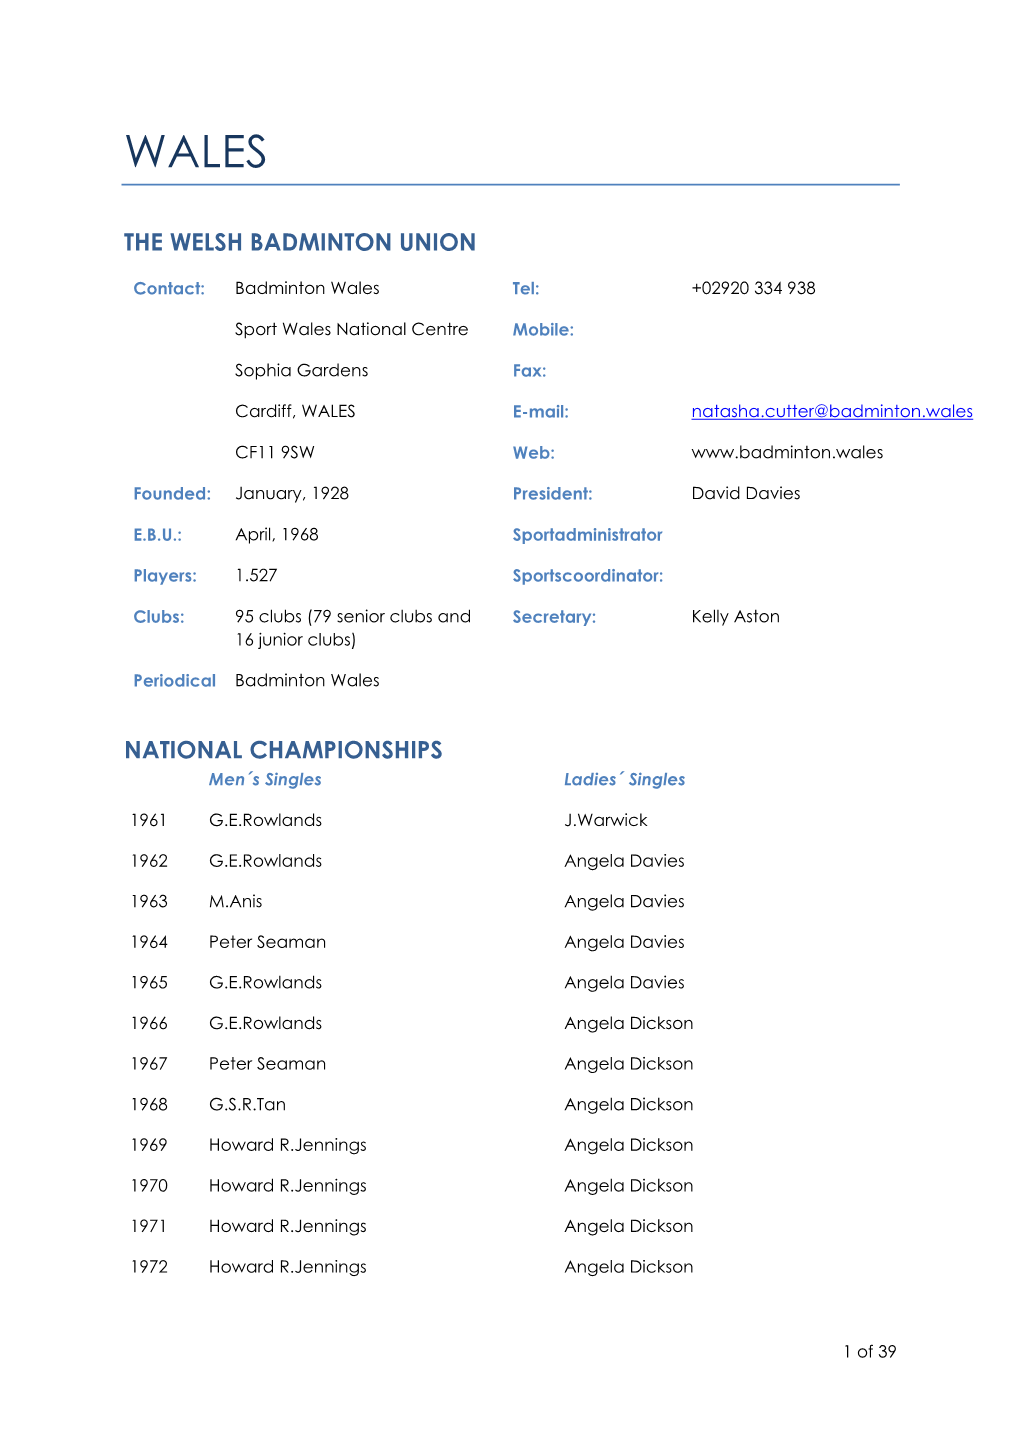 The Welsh Badminton Union National Championships